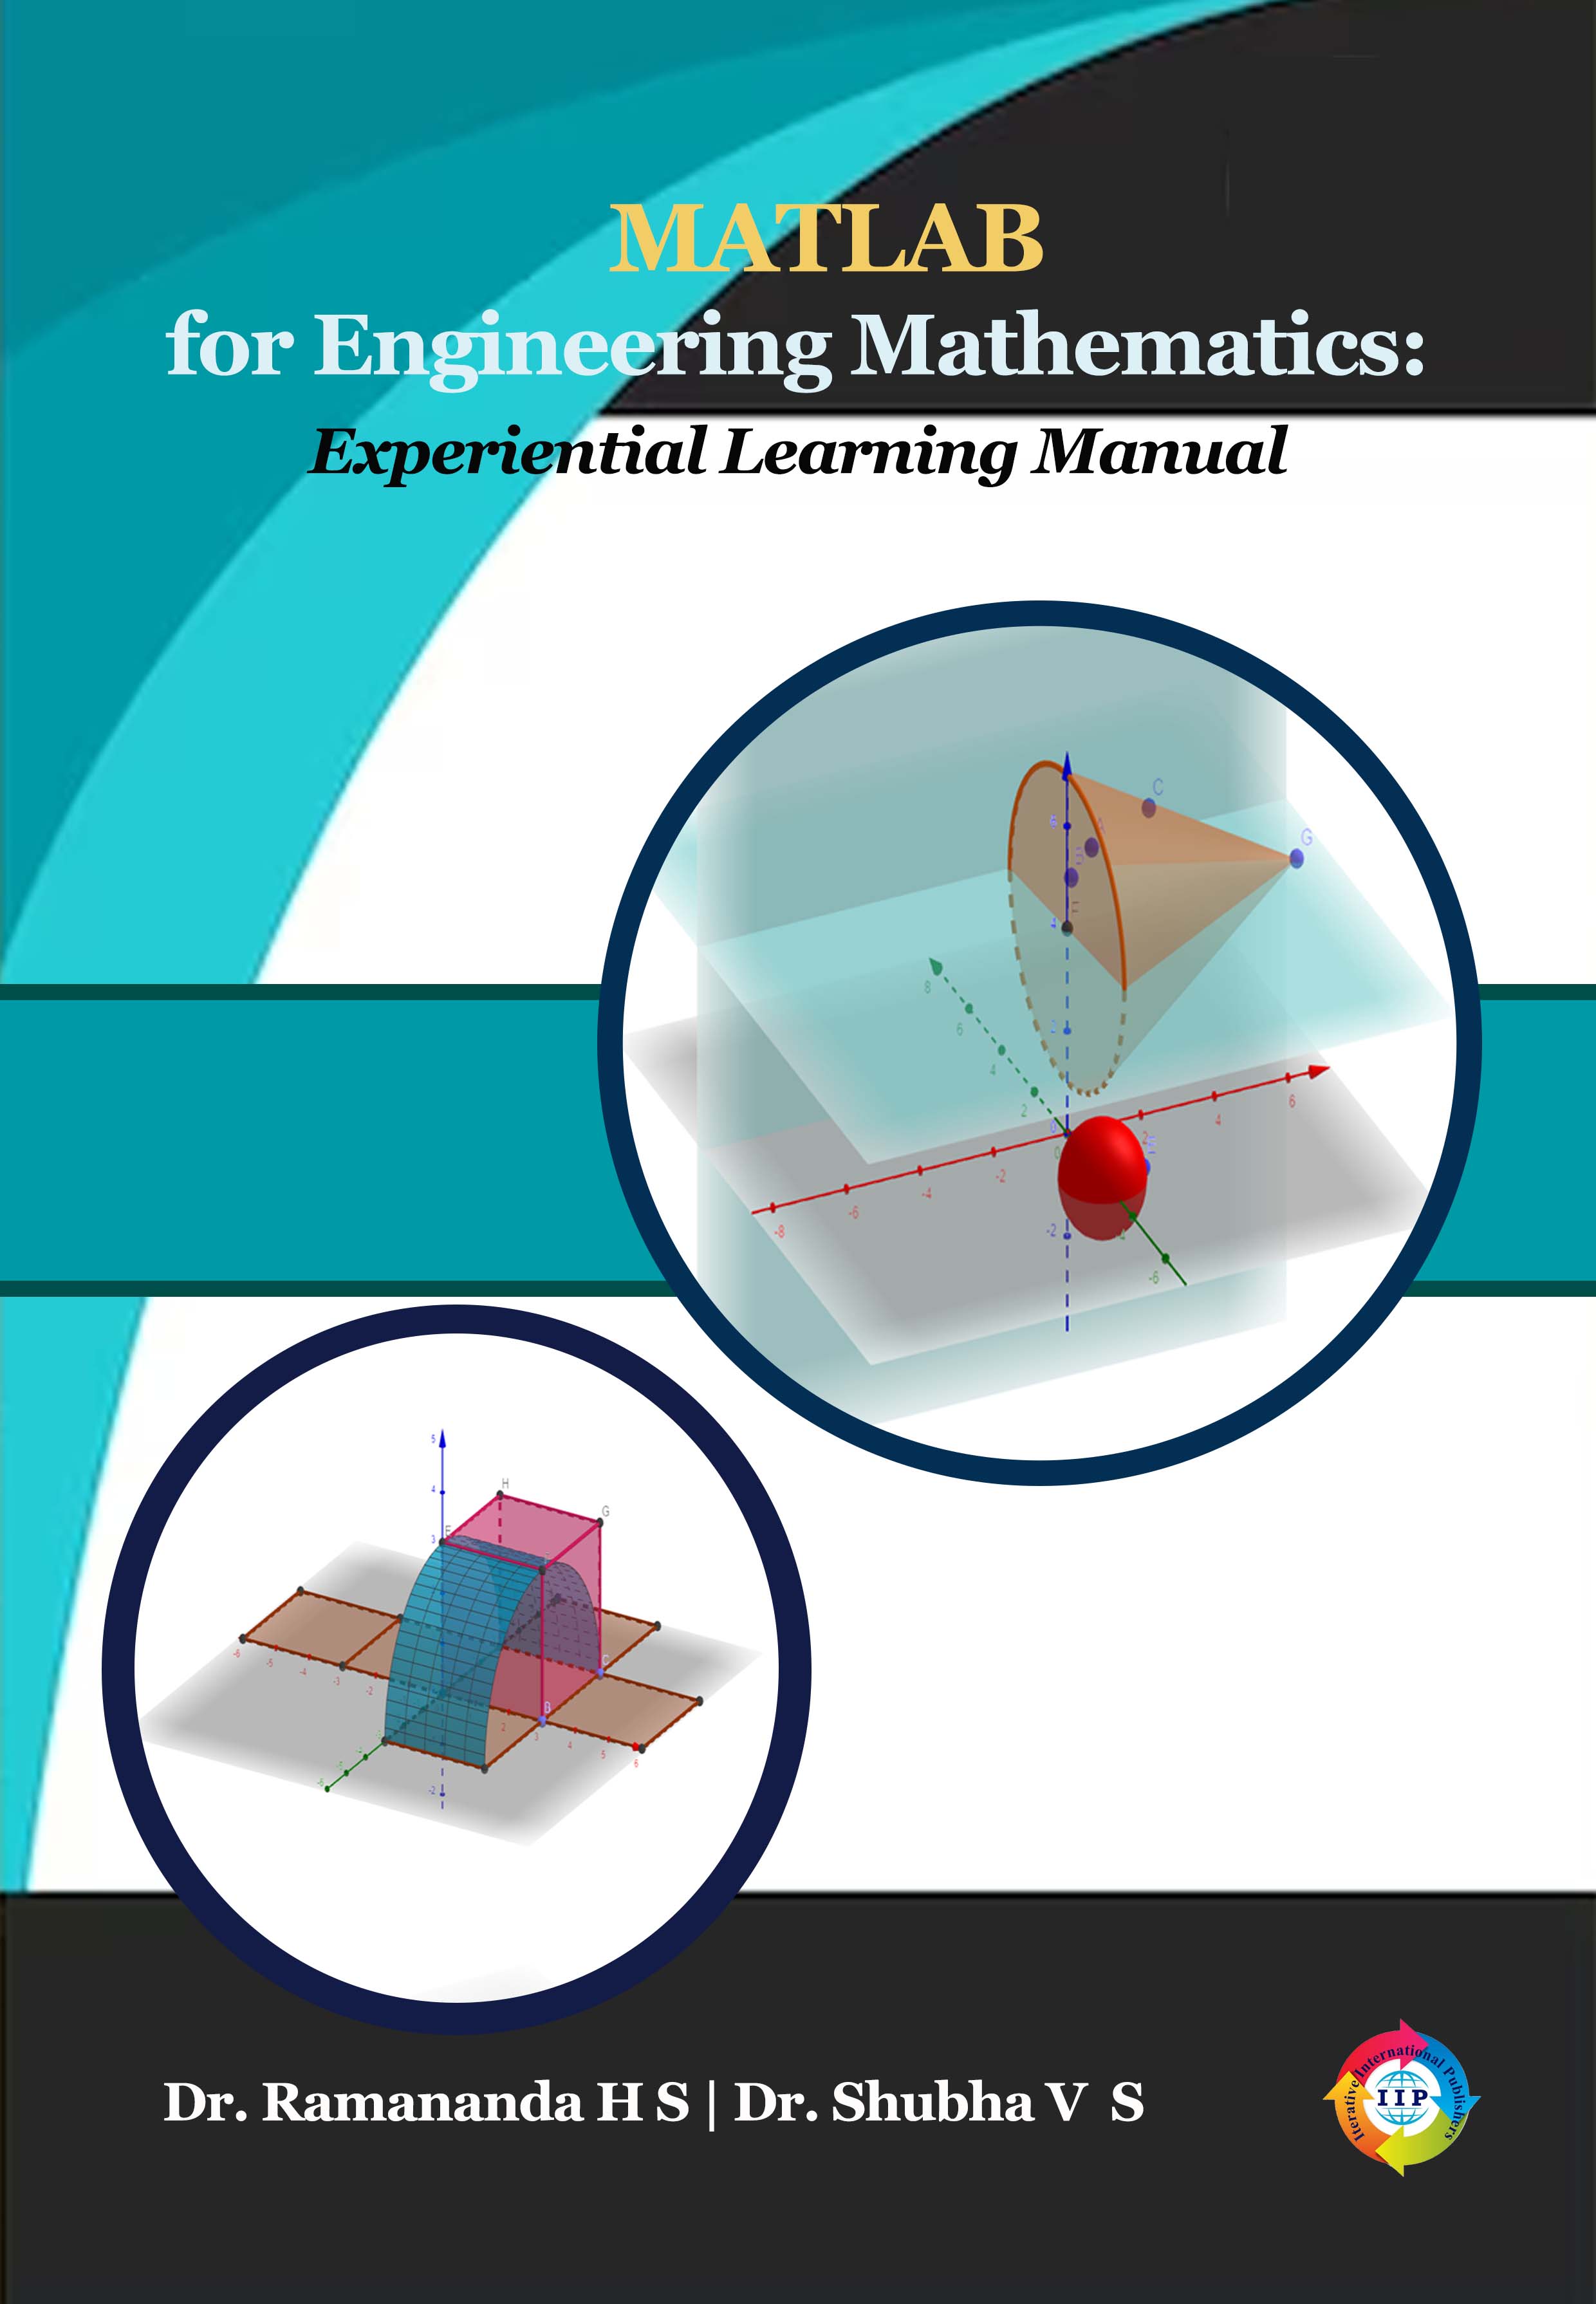 MATLAB FOR ENGINEERING MATHEMATICS: EXPERIENTIAL LEARNING MANUAL